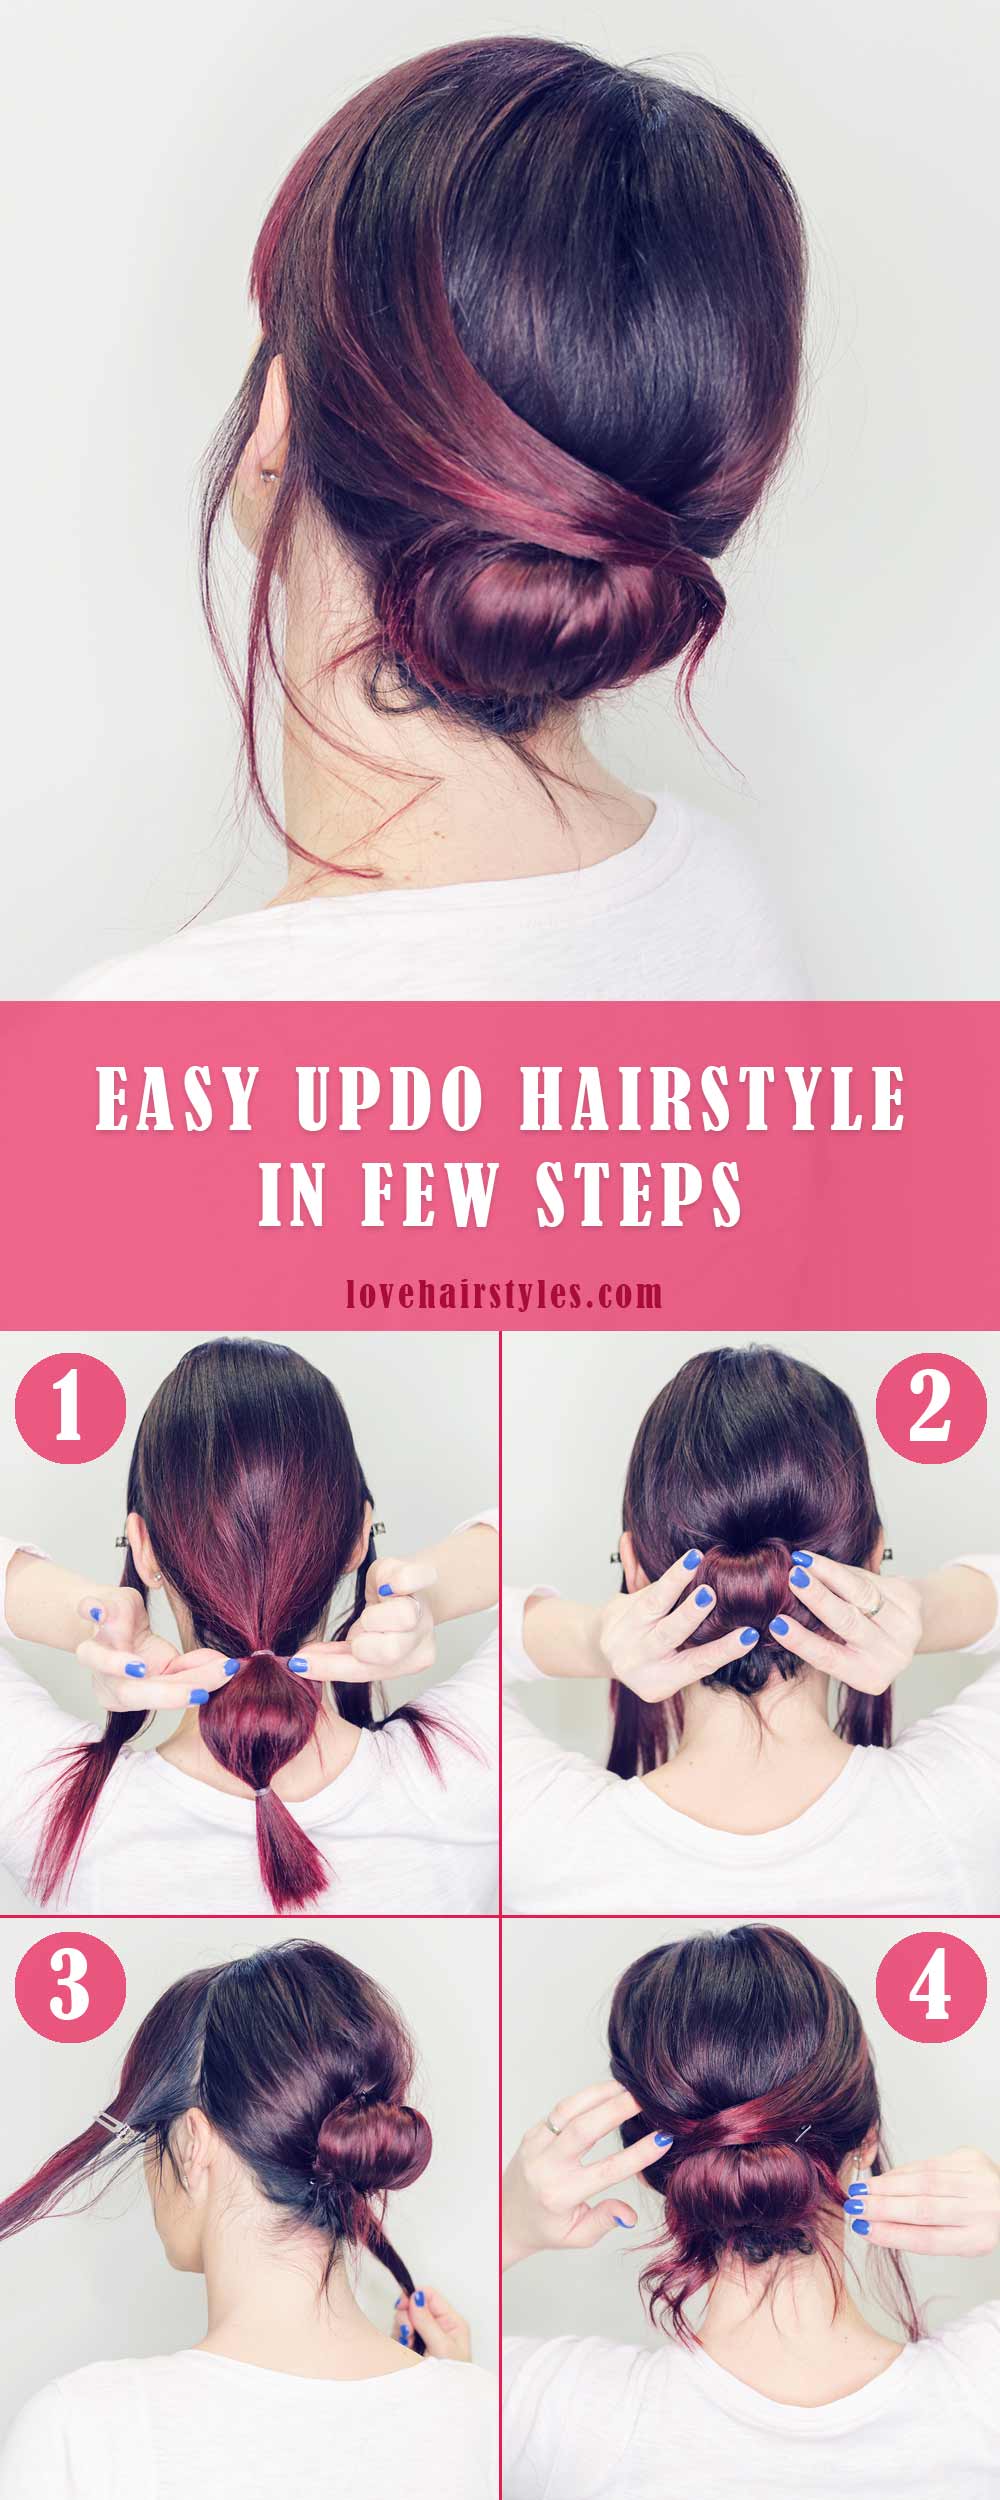 15 Easy Yet Trendy Hairstyles for Lazy Women - Styles Weekly